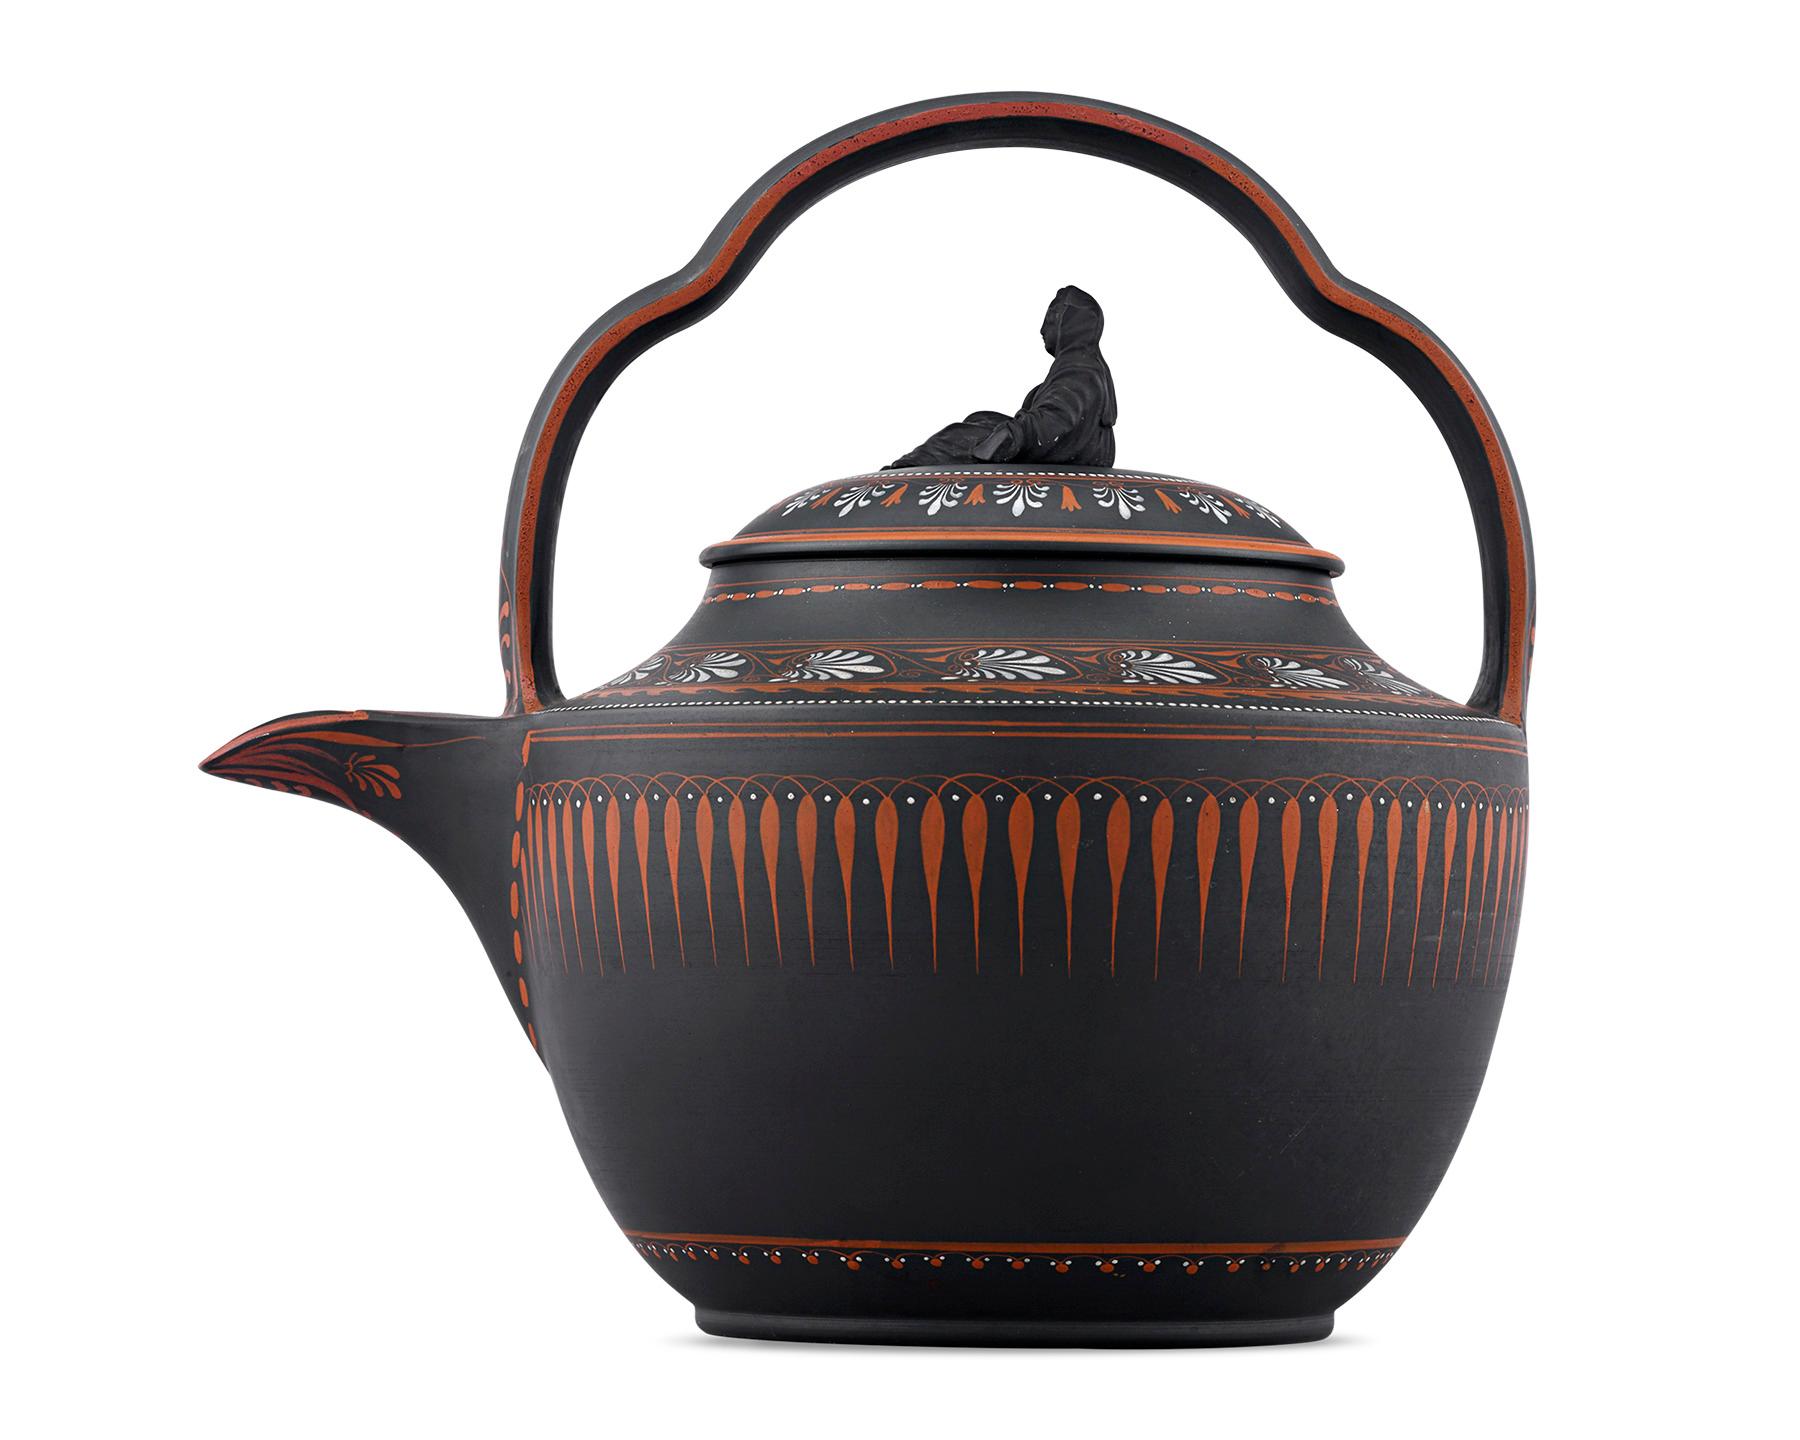 Crafted by Wedgwood, this rare, round-shaped rum kettle is comprised of black basalt and features a molded bail handle and glazed interior. Referred to as “the widow,” a “Sybil” figure of a seated woman covered head-to-toe in a shroud sits atop the